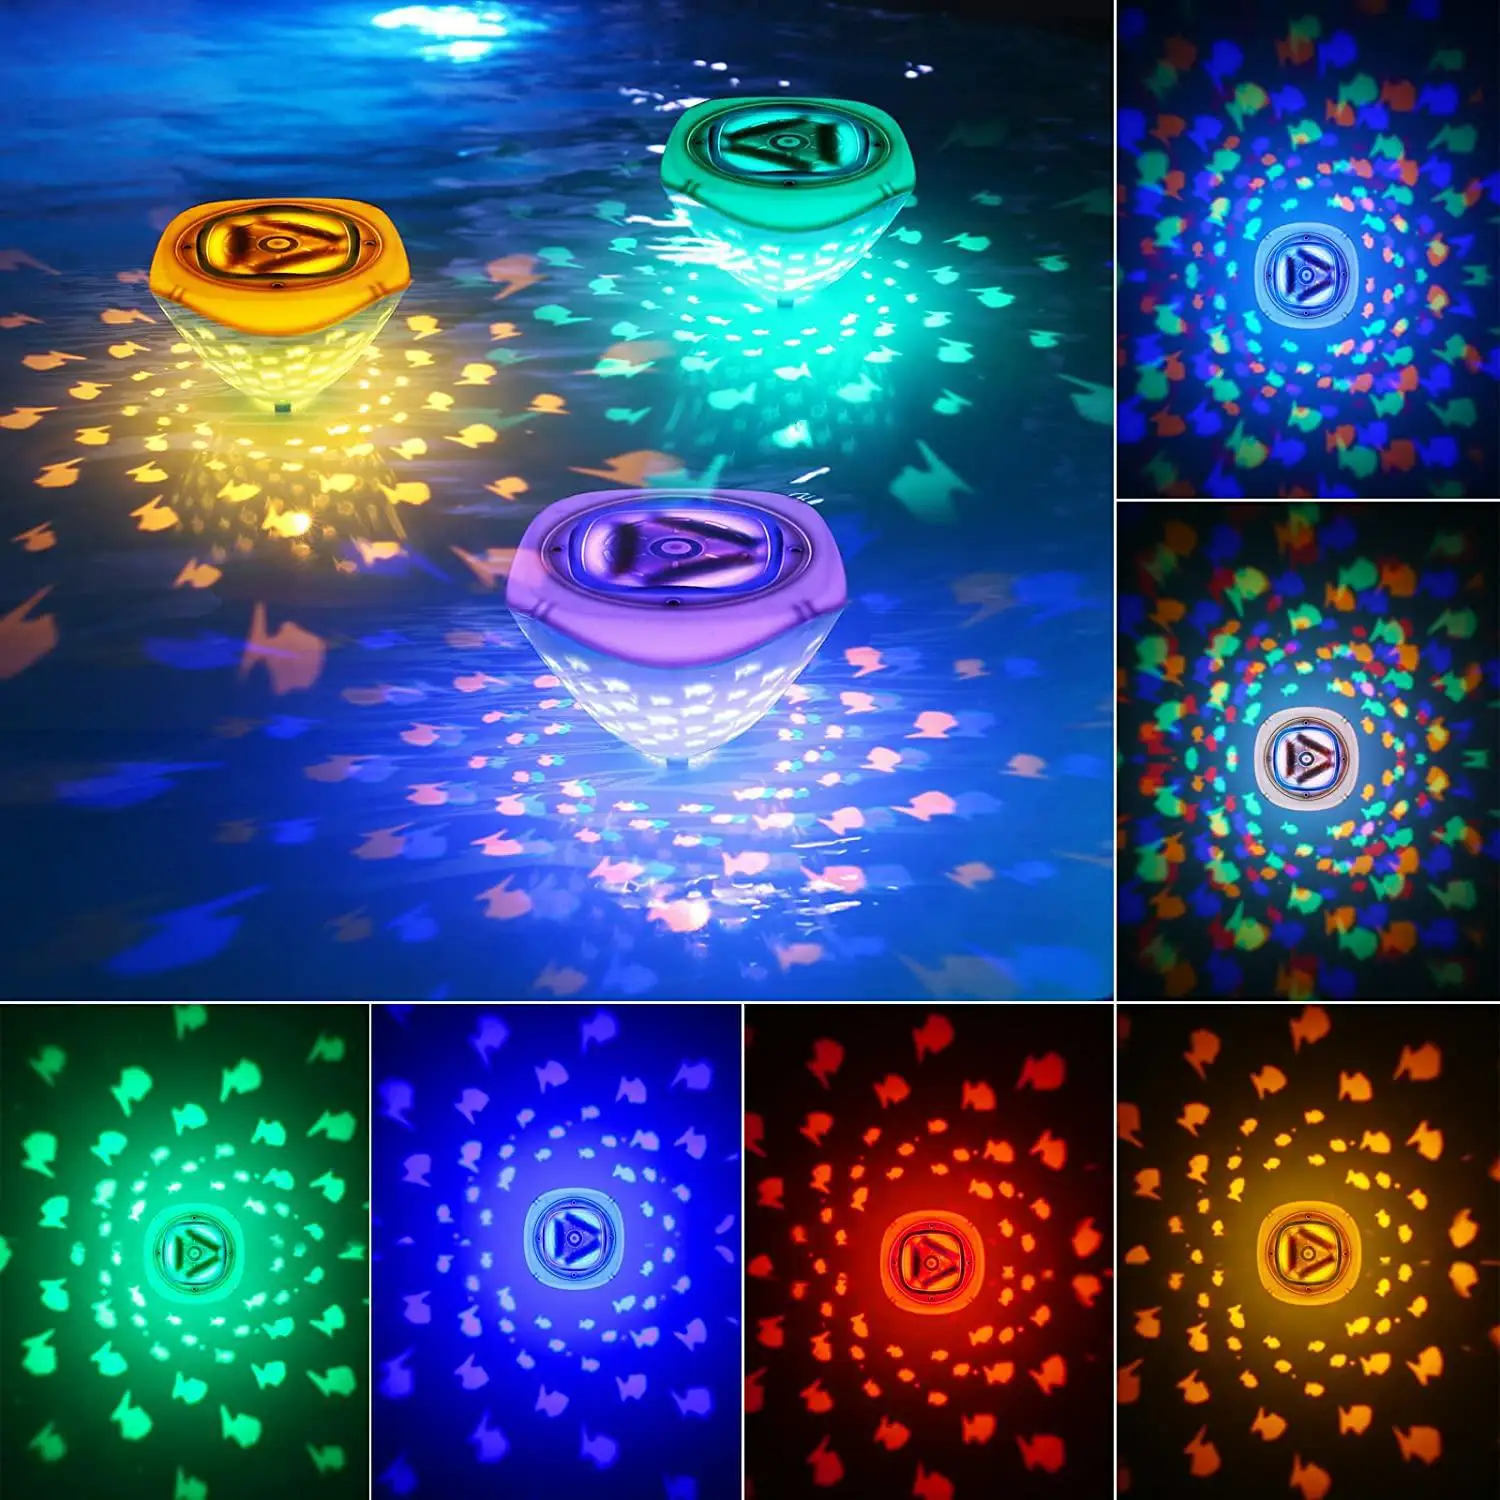 LED Pool & Bathtub Waterproof Fish Projection Light - Aquarium Floating & Fountain Underwater Lamp - Diving Ambiance Light